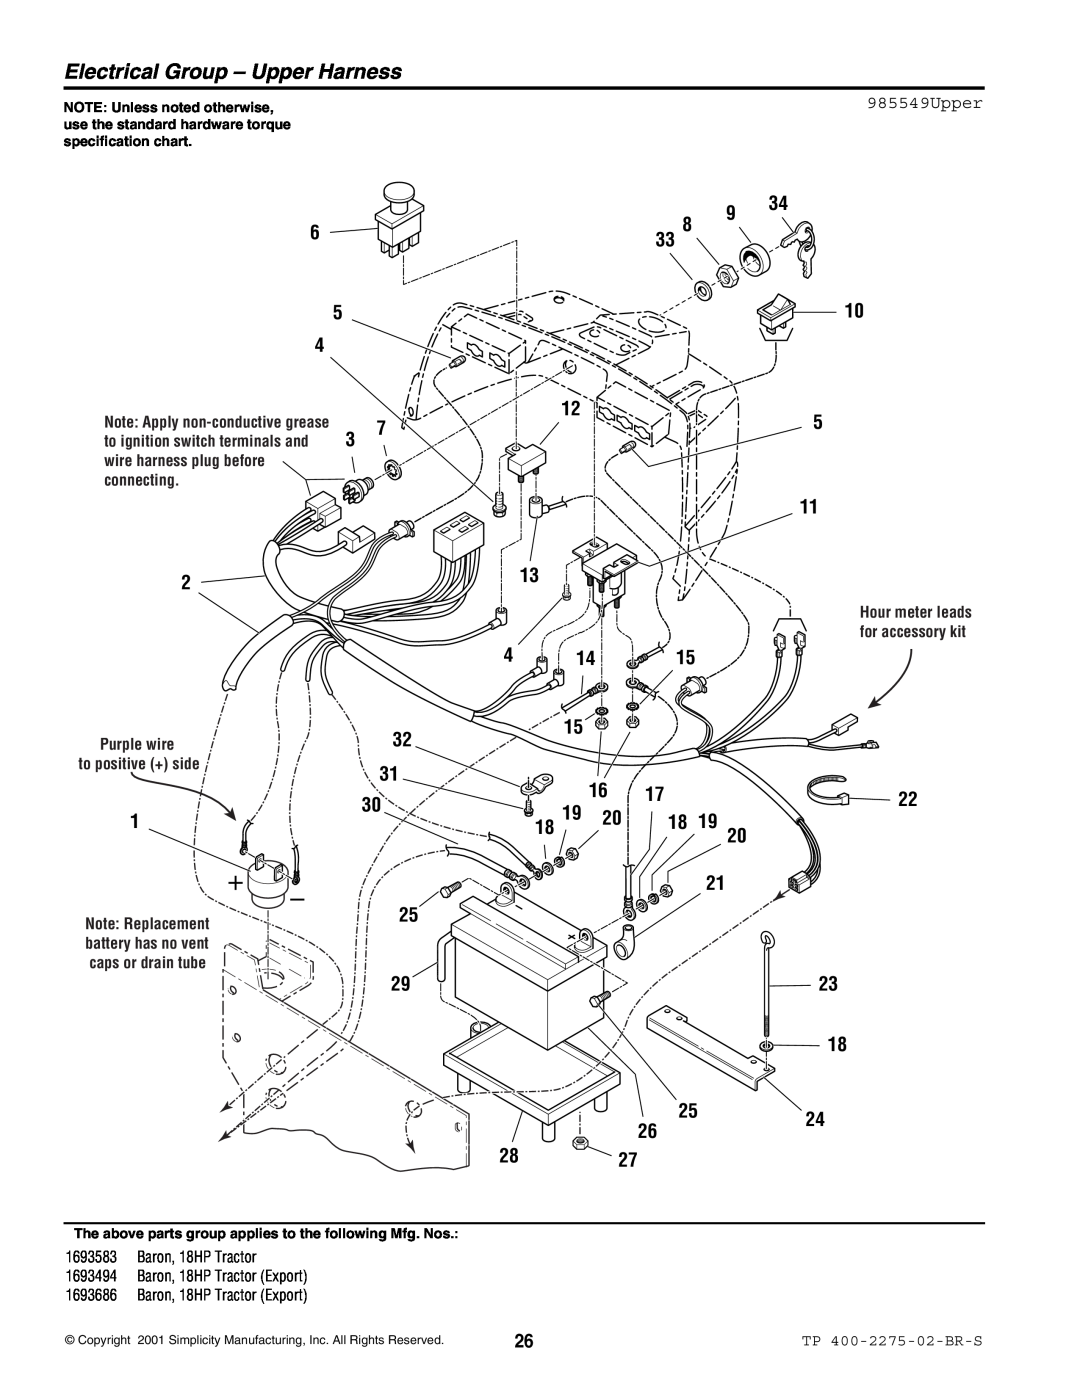 Massey Ferguson L&G 1693583 manual Electrical Group - Upper Harness, 985549Upper, wire harness plug before, connecting 